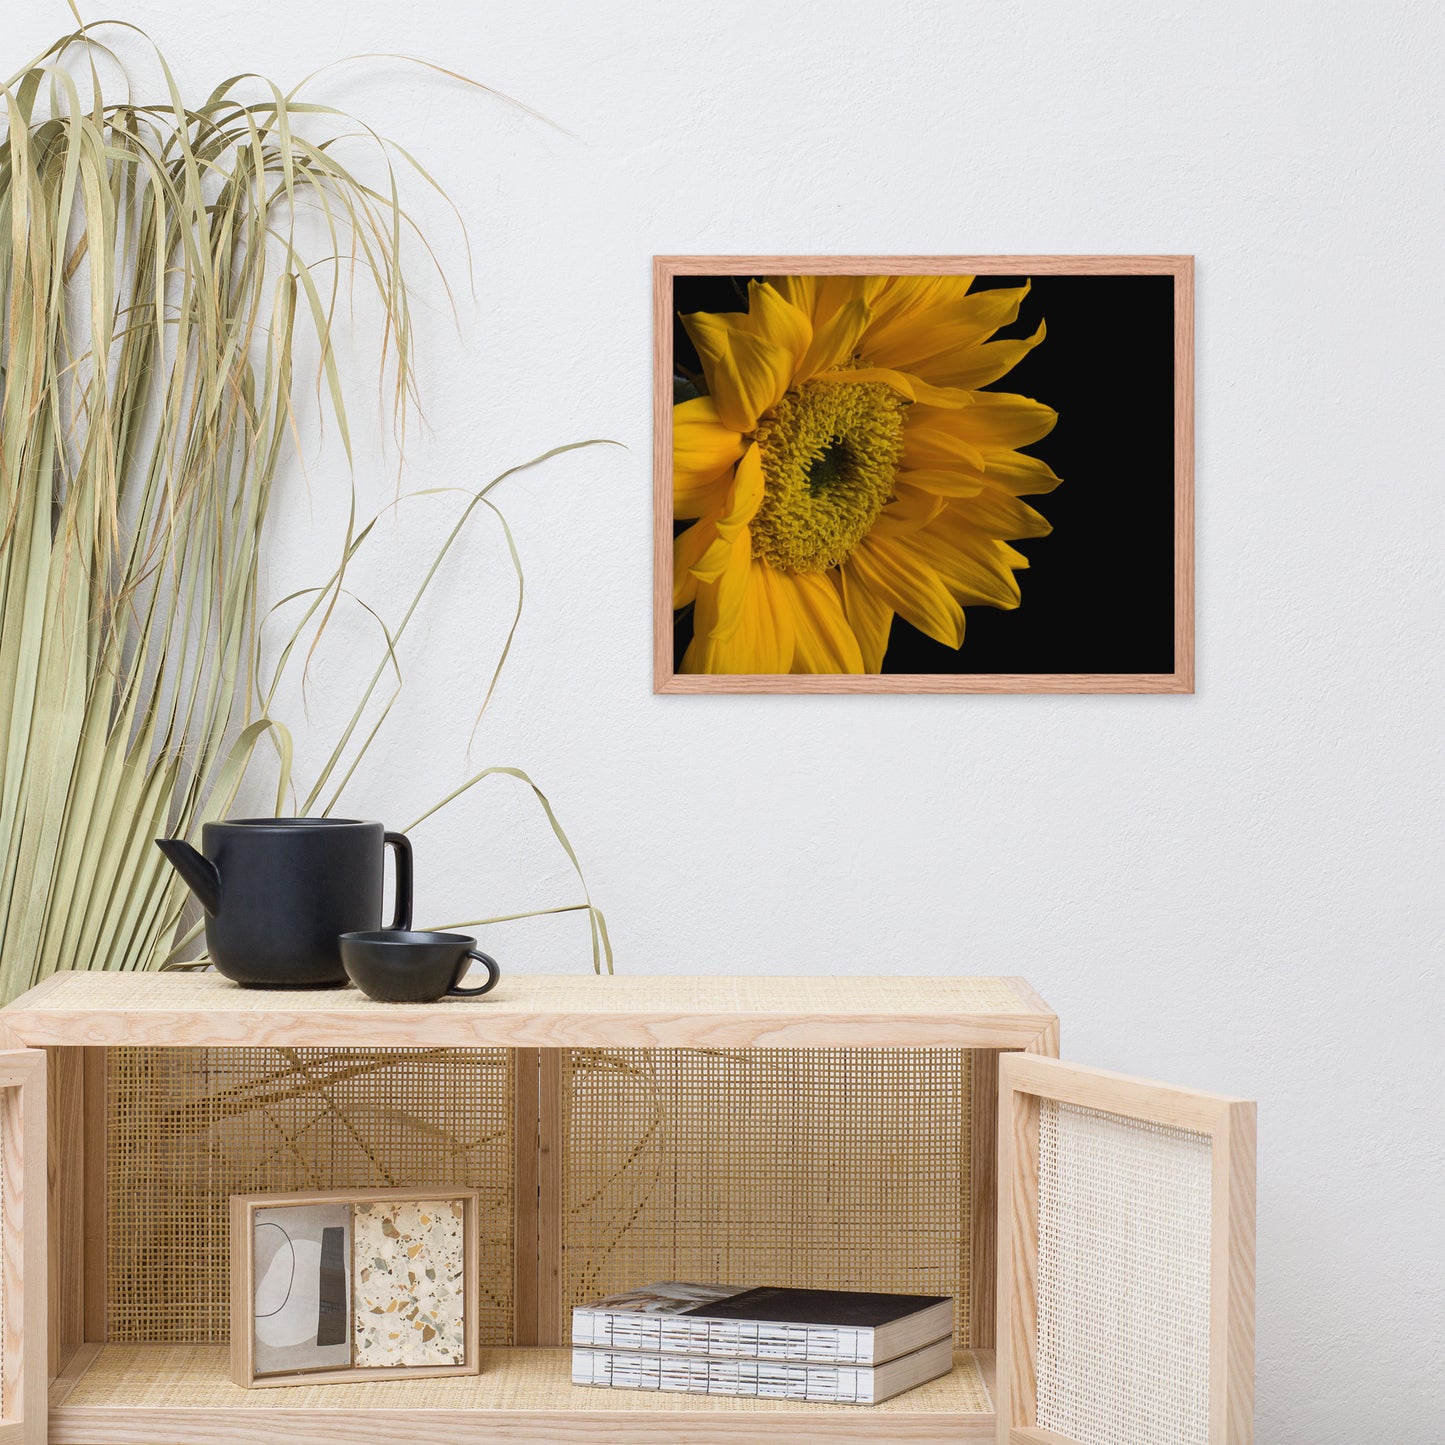 Sunflower from Left Floral Nature Photo Framed Wall Art Print